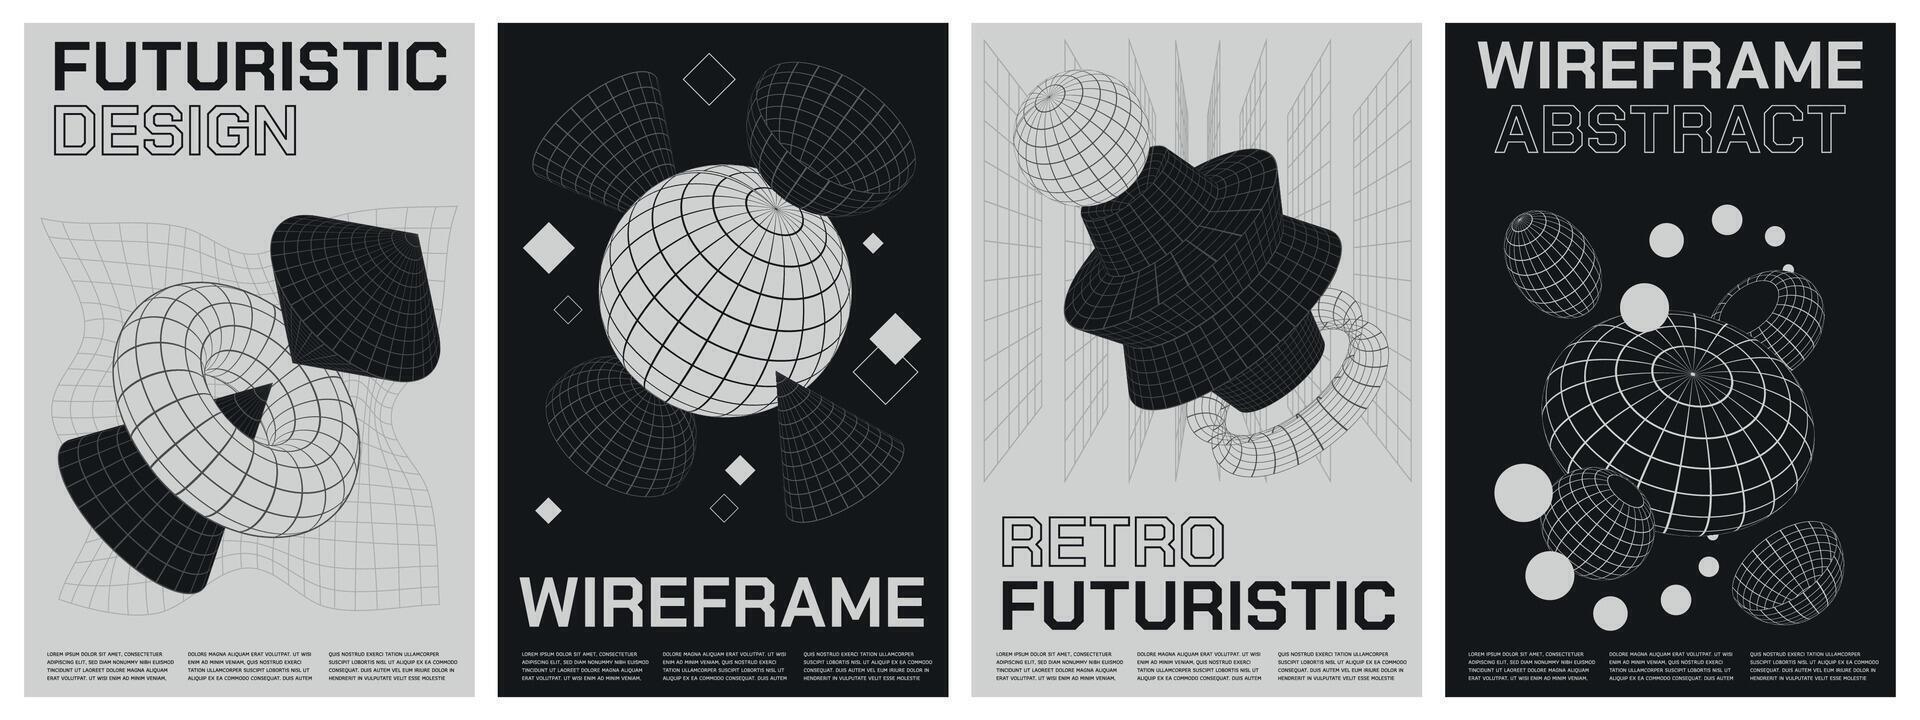 Modern wireframe posters. Retro futuristic modern grid shapes of different sizes, 80s and 90s geometric contemporary artwork. Vector brochures design mockup